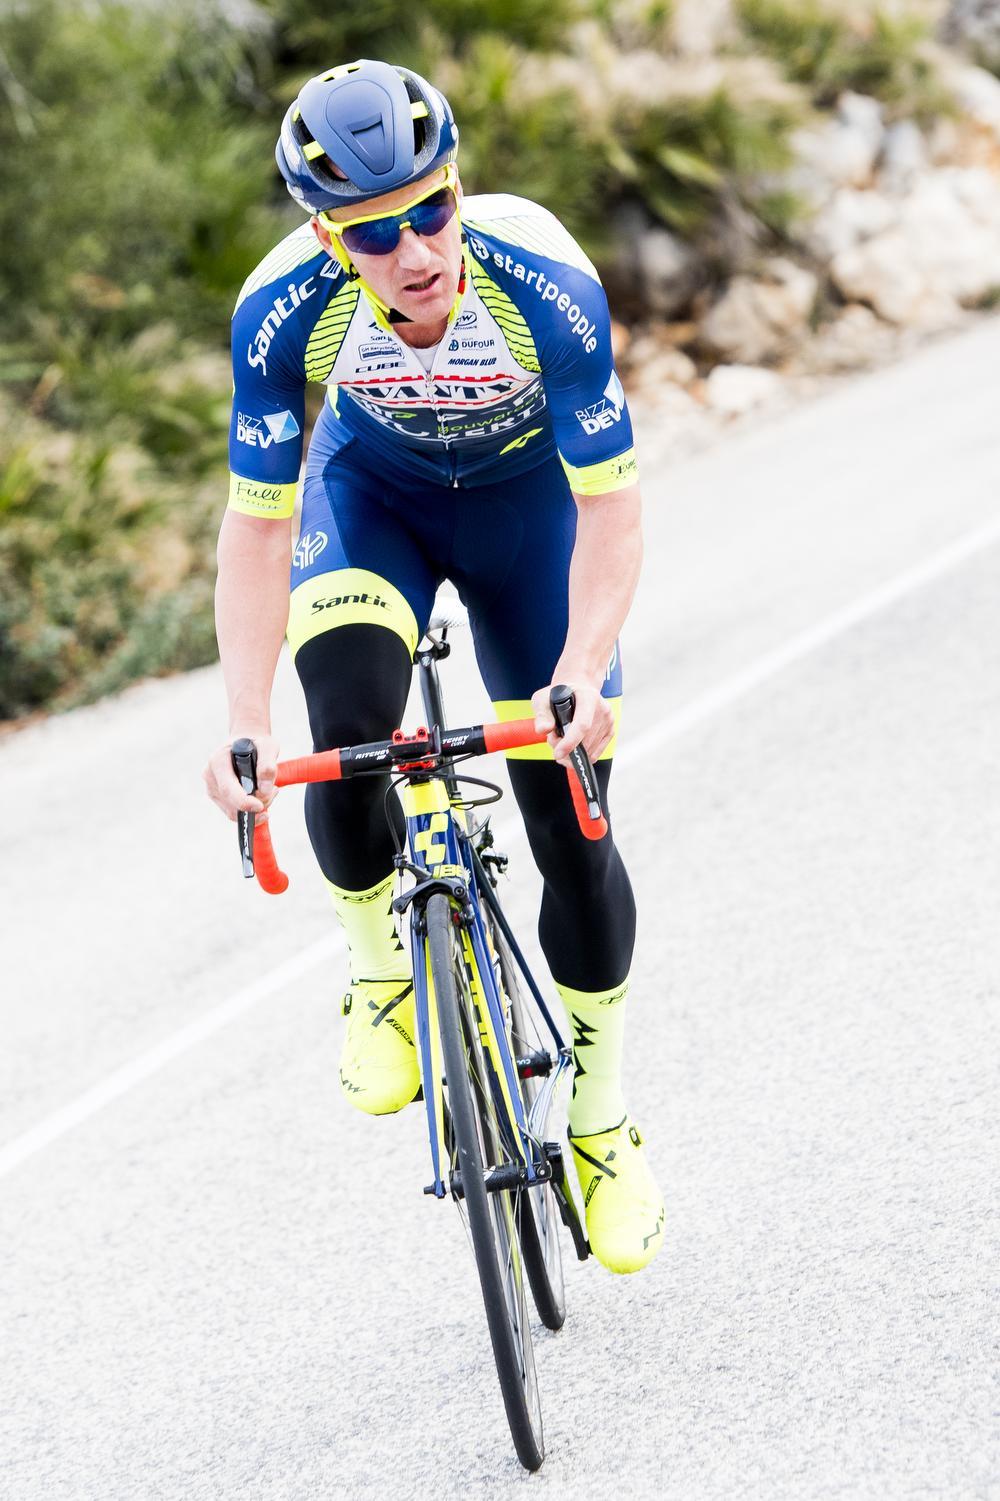 Belgian Timothy Dupont pictured in action during a training session of Belgian cycling team Wanty-Groupe Gobert, in Benidorm, during their winter training camp in Spain, Saturday 13 January 2018.